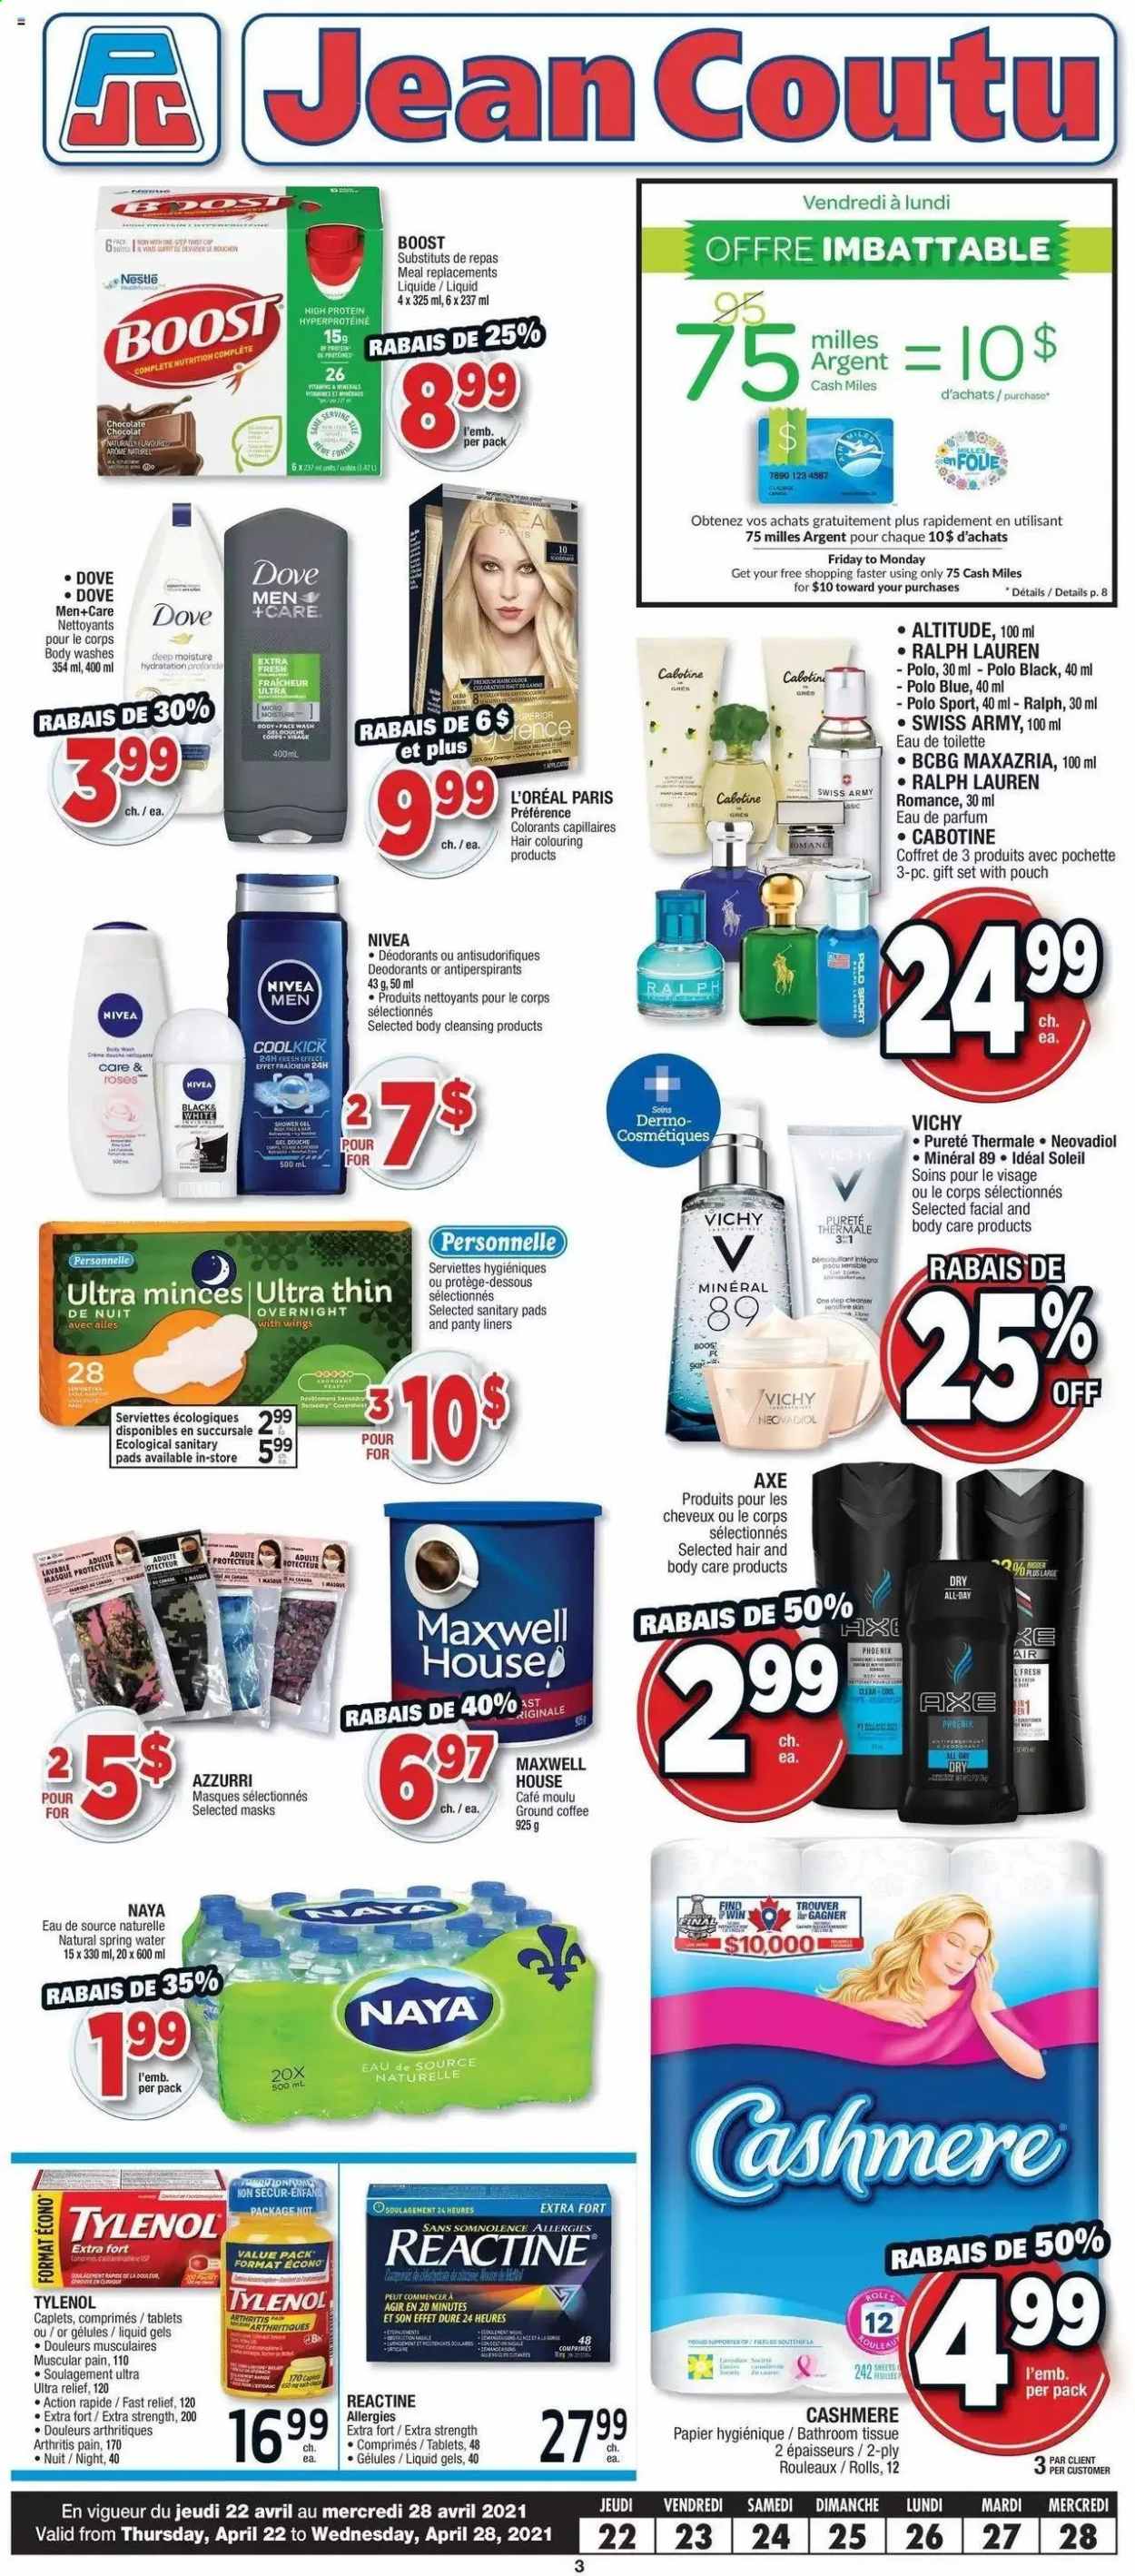 thumbnail - Jean Coutu Flyer - April 22, 2021 - April 28, 2021 - Sales products - chocolate, spring water, Boost, Maxwell House, coffee, ground coffee, bath tissue, shower gel, Vichy, sanitary pads, cleanser, L’Oréal, Ralph Lauren, gift set, Tylenol, Nestlé, Nivea, deodorant. Page 1.